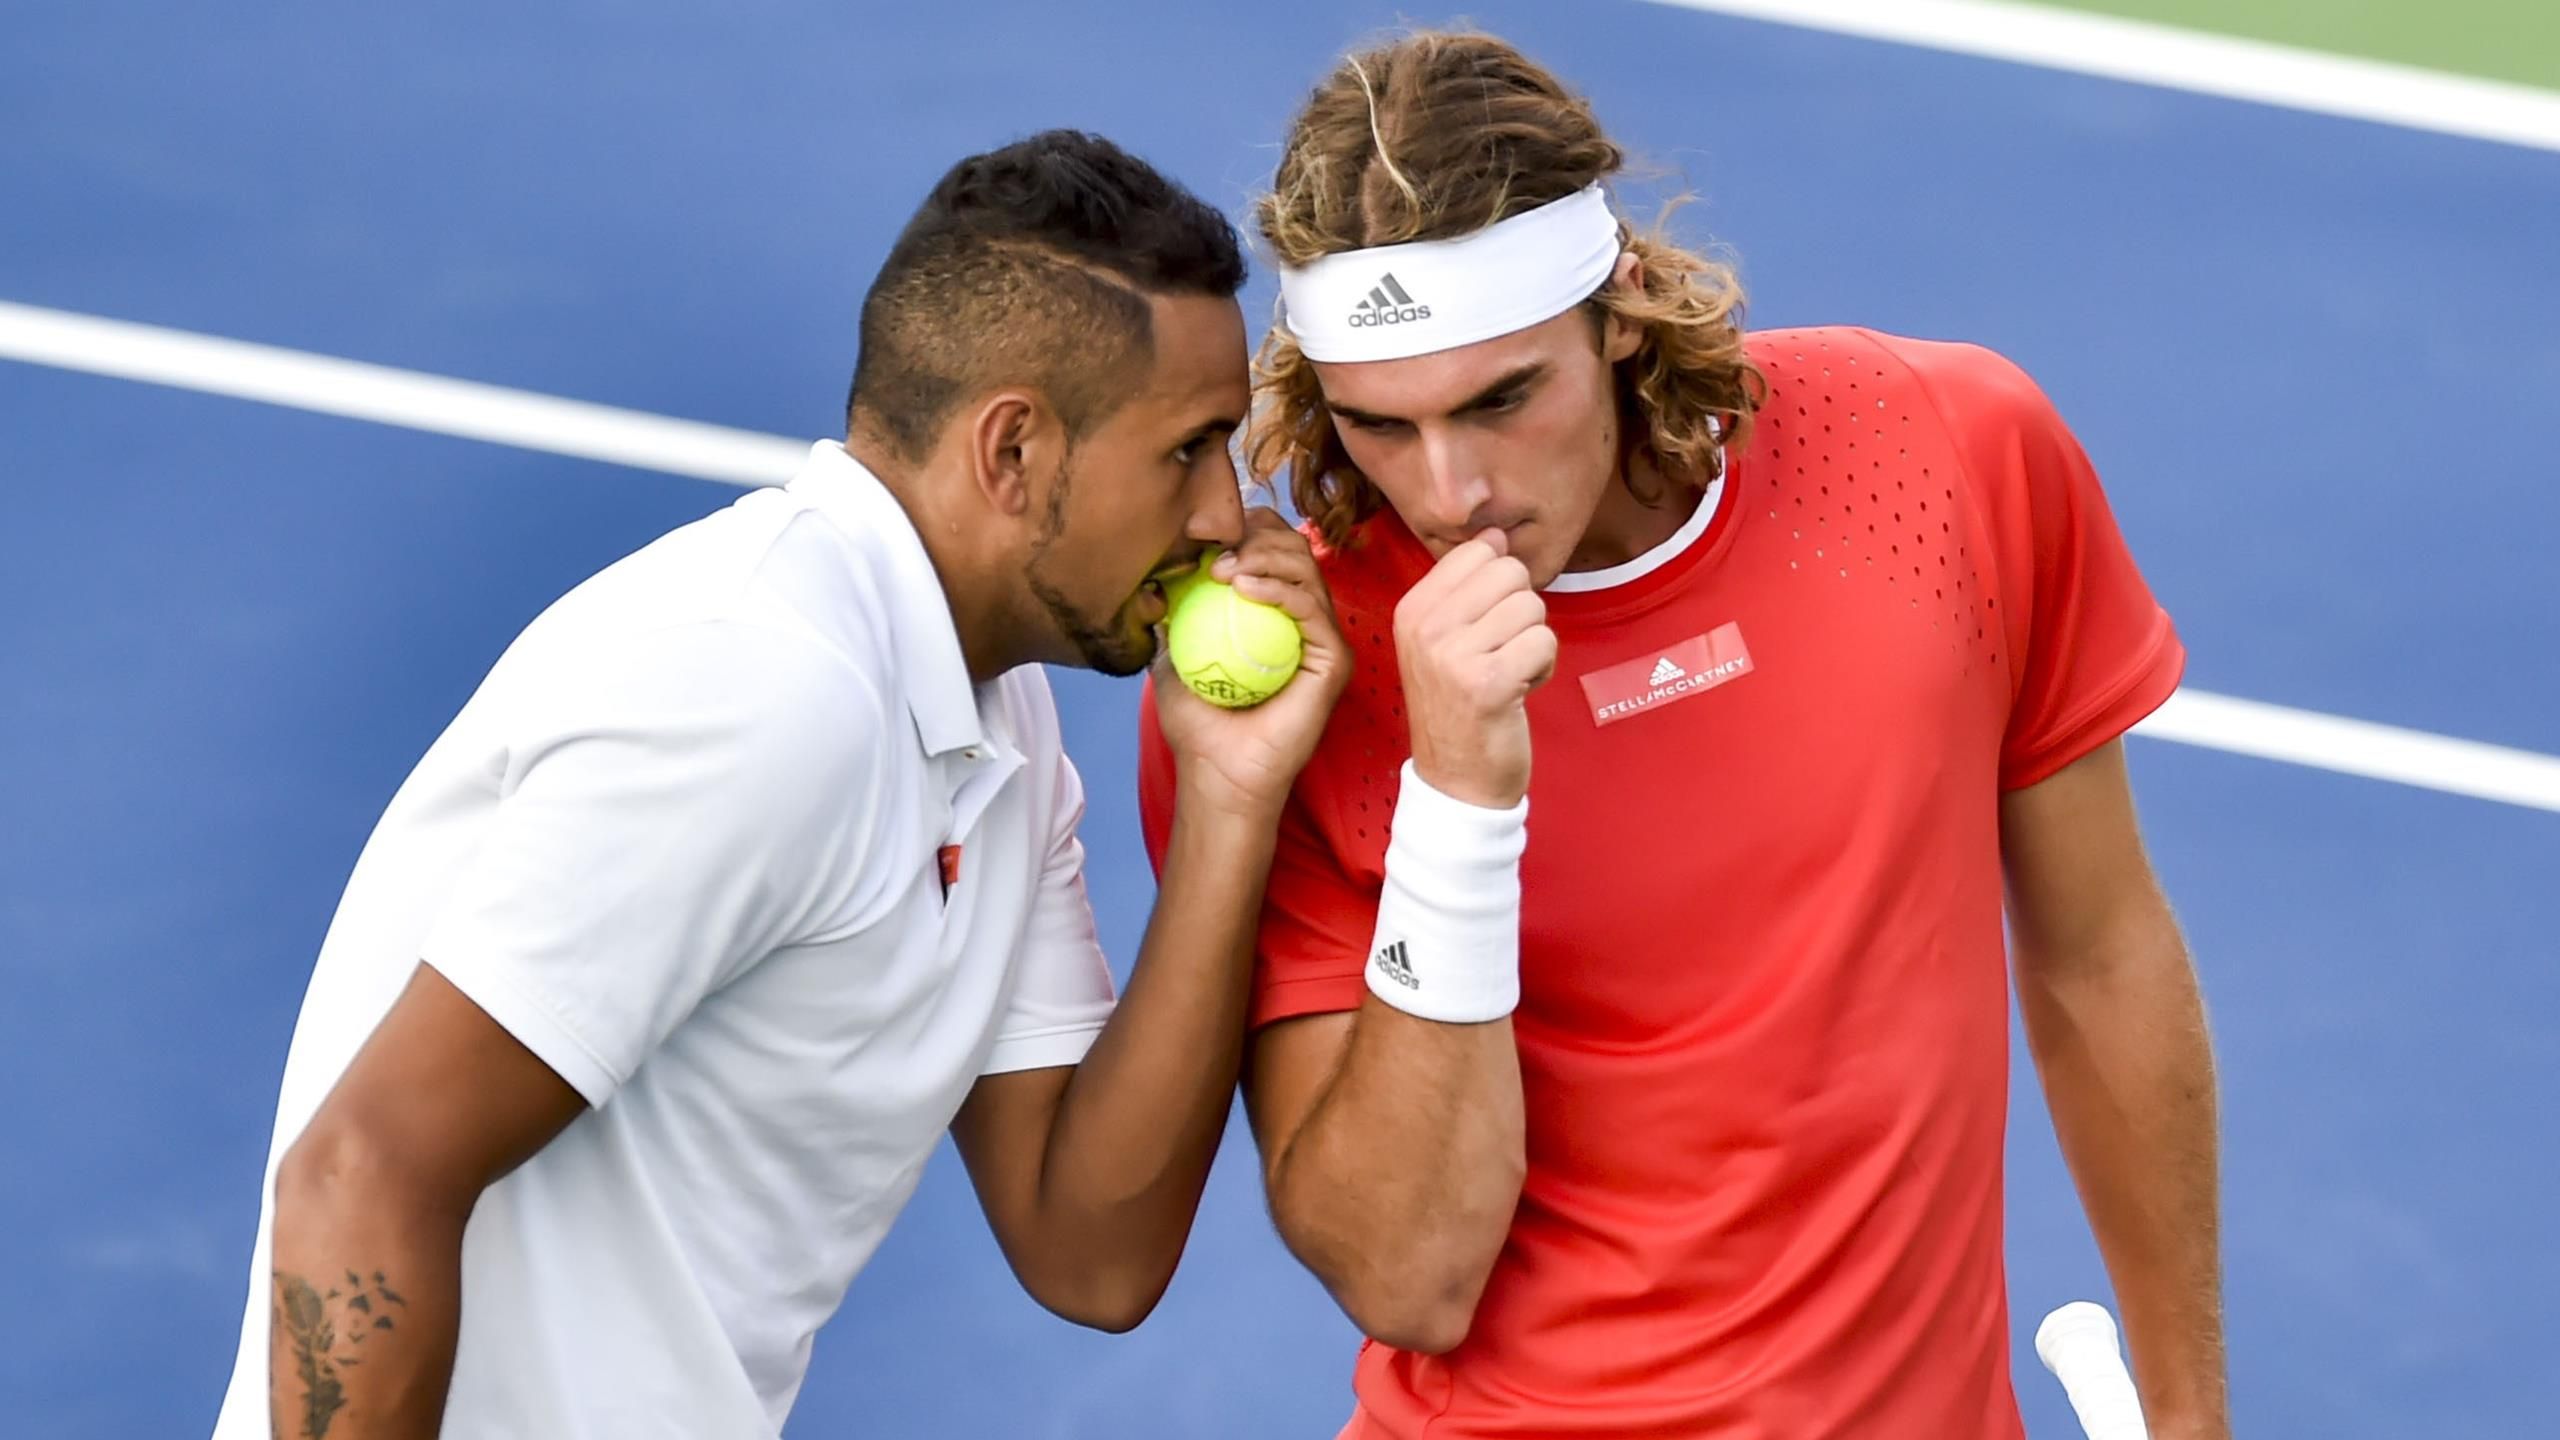 Stefanos Tsitsipas Nick Kyrgios is the black sheep of the ATP Tour who likes attention